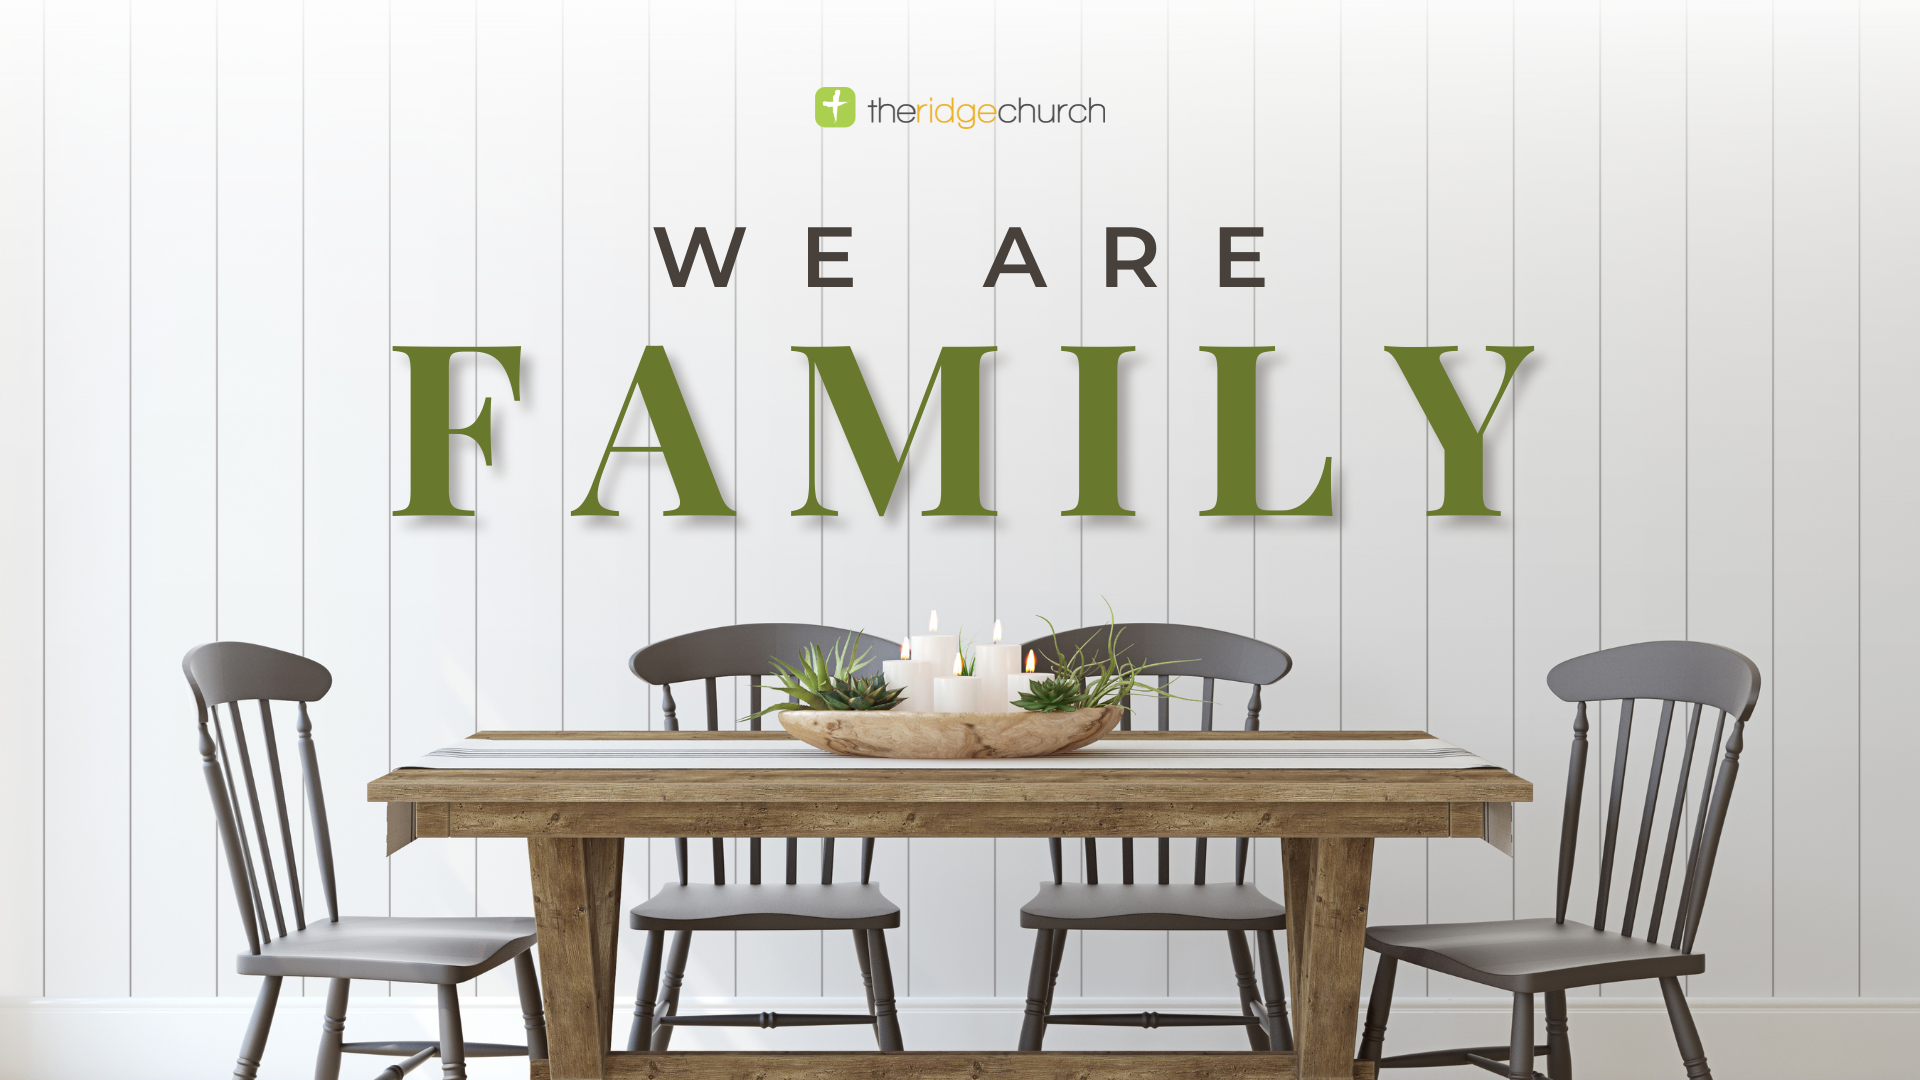 We Are Family banner